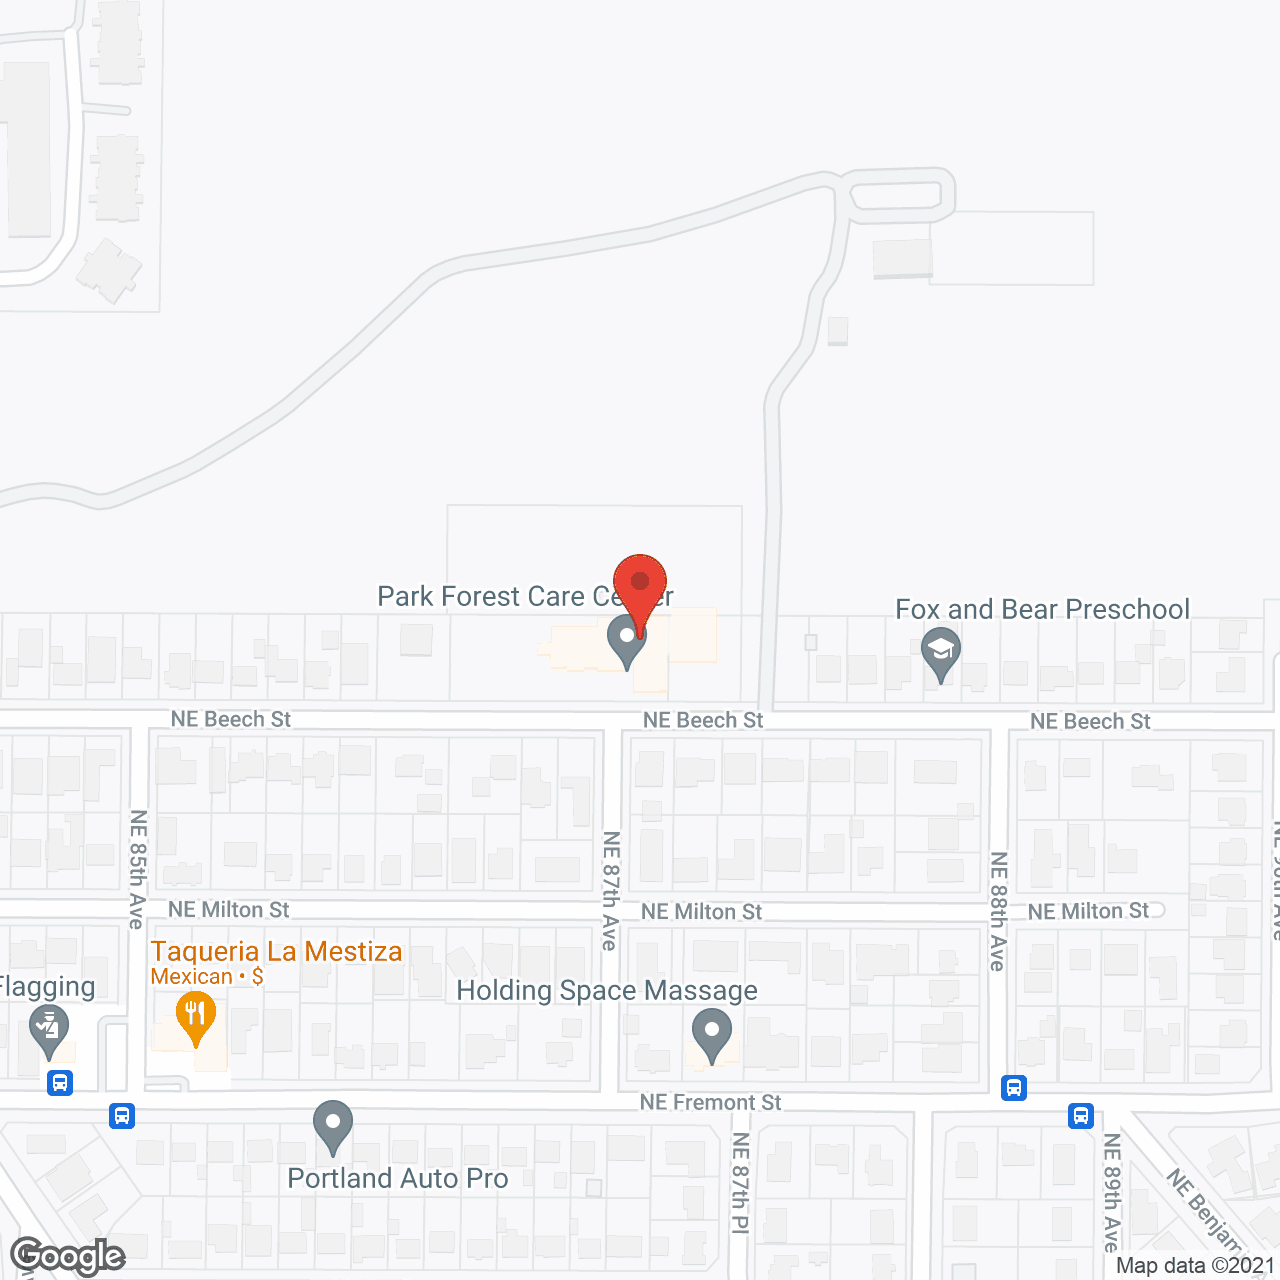 Park Forest Care Center in google map